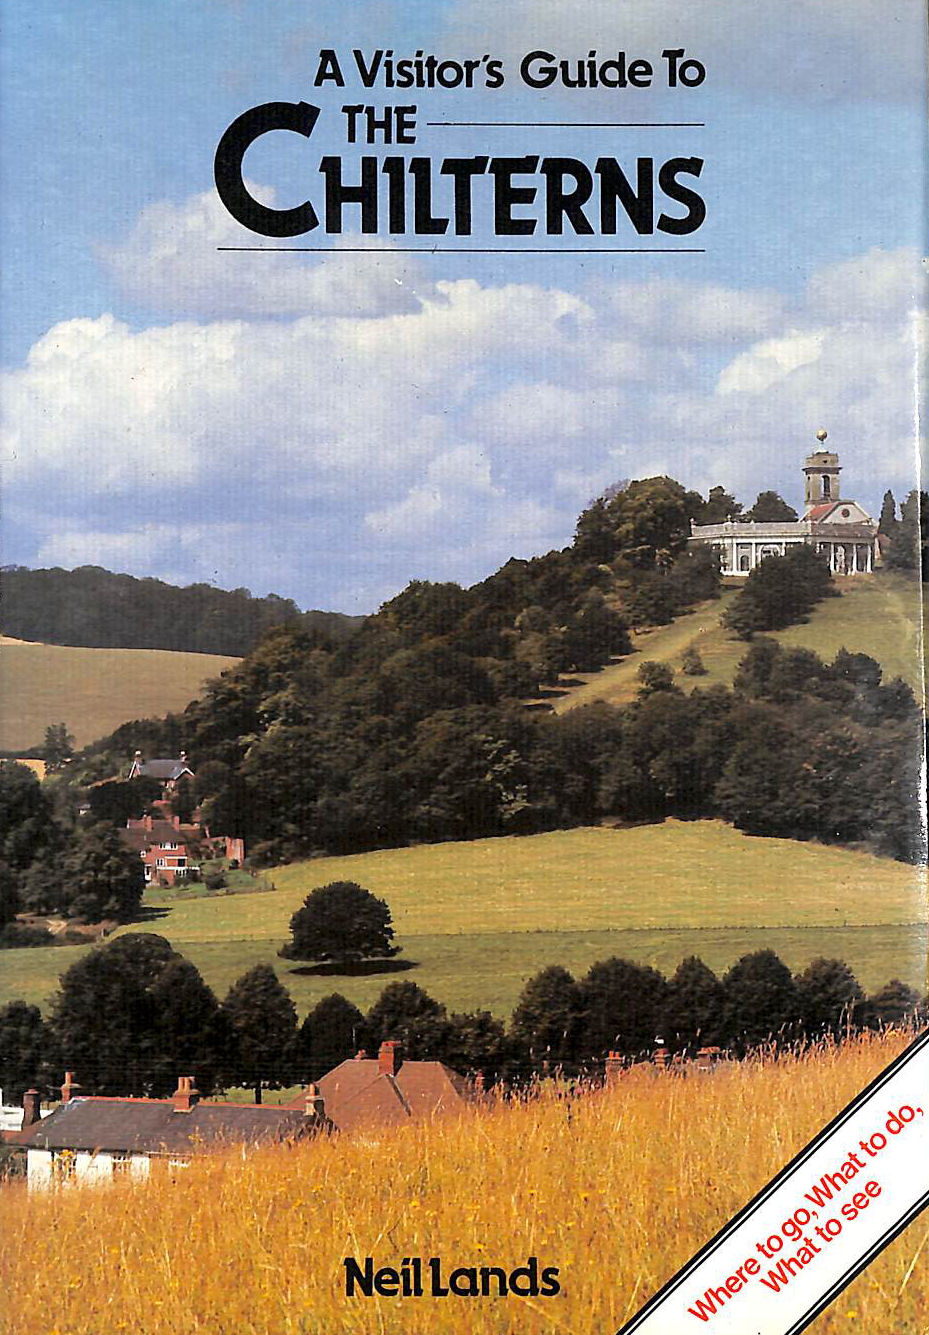 LANDS, NEIL - Visitor's Guide to the Chilterns